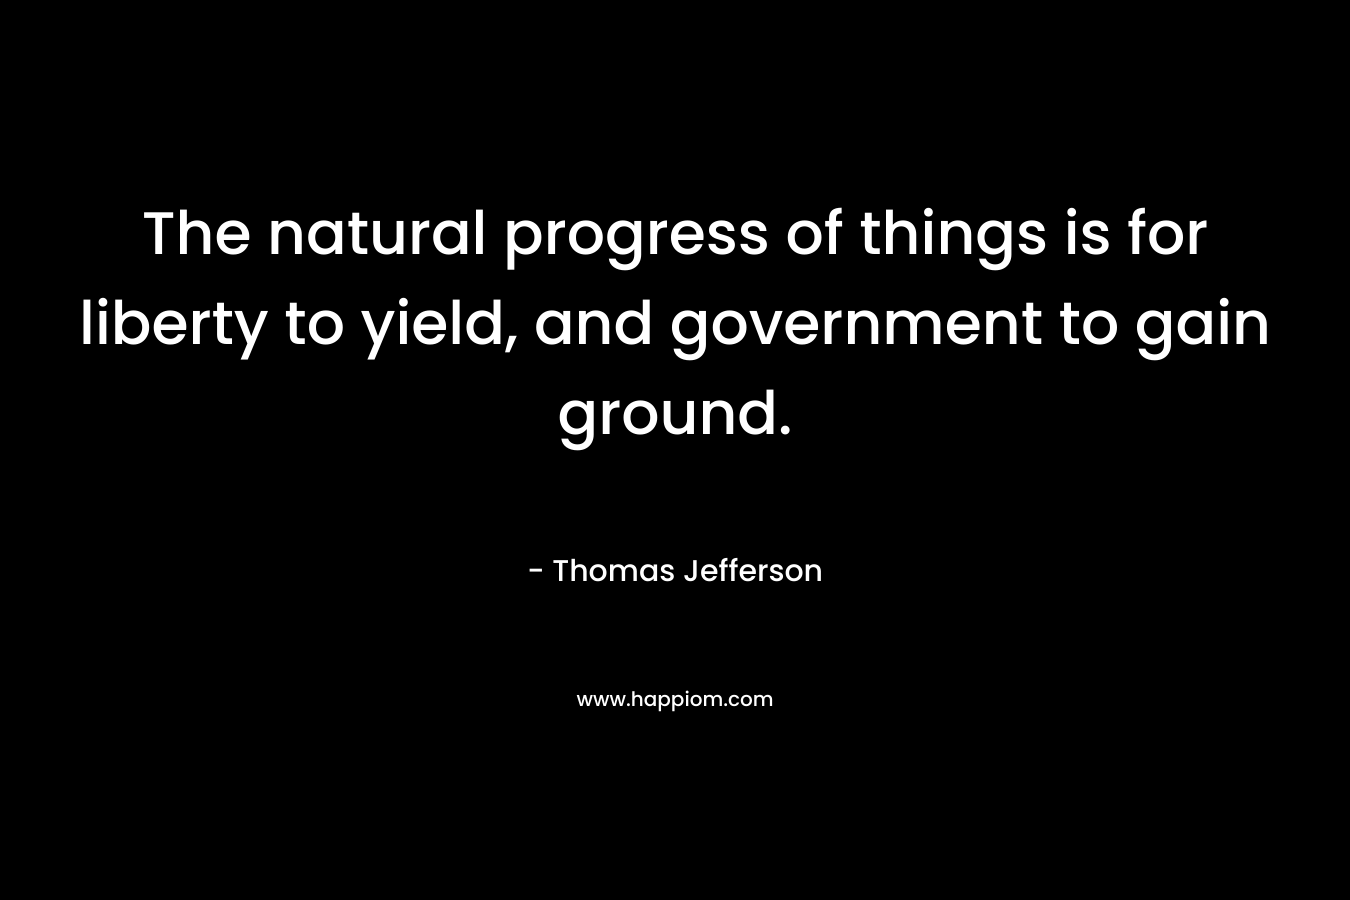 The natural progress of things is for liberty to yield, and government to gain ground. – Thomas Jefferson